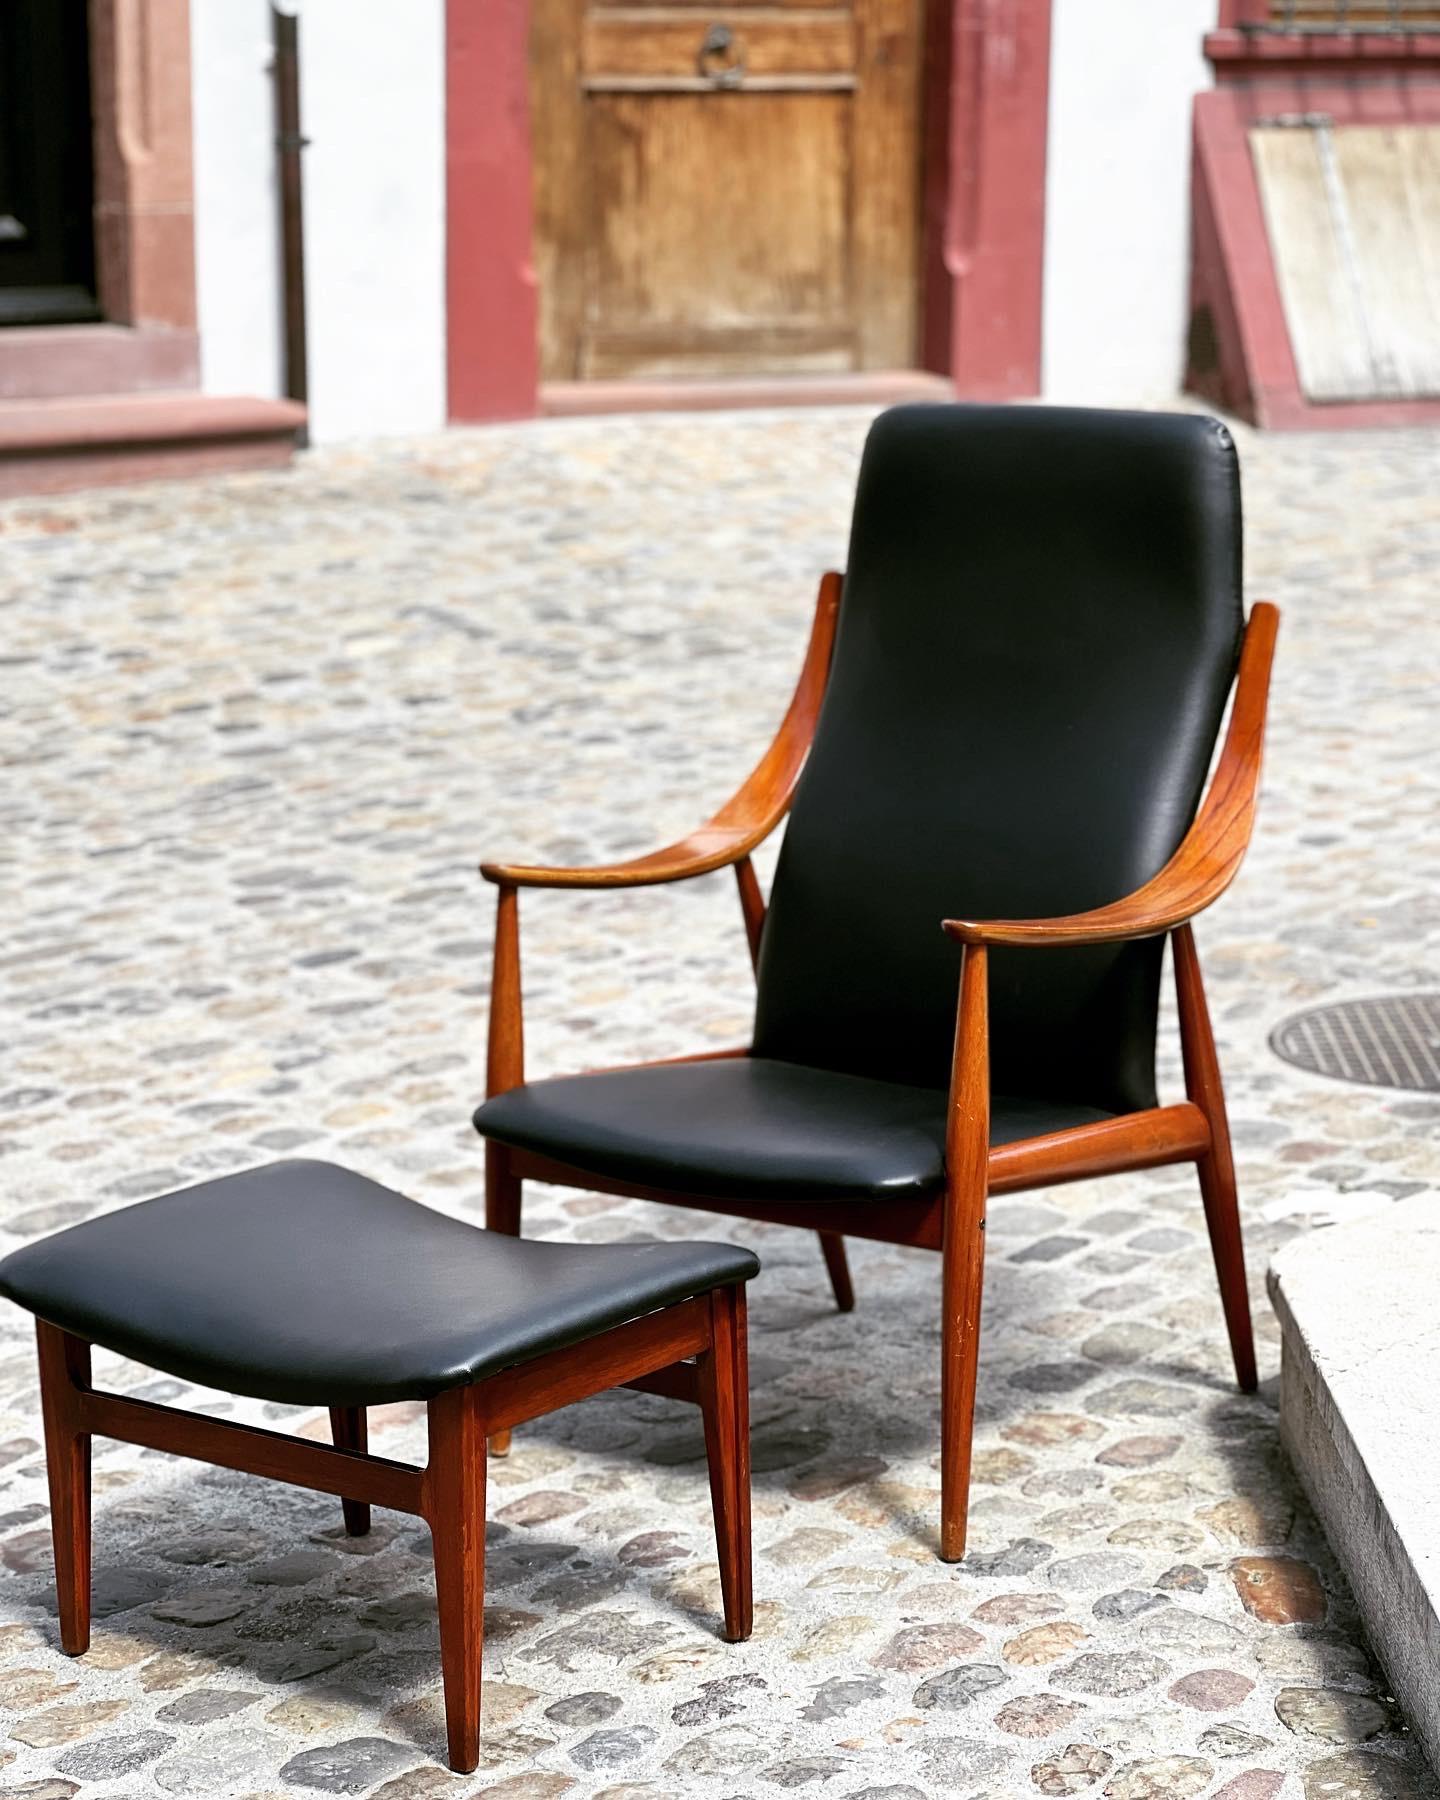 Unusually shaped teak armchair and ottoman from the Danish designer duo Peter Hvidt and Orla Molgaard Nielsen. produced by France and Son in Denamark in the late 1950s beginning og 1960s.
 The armchair Mod. 148 convinces with its flowing design, as